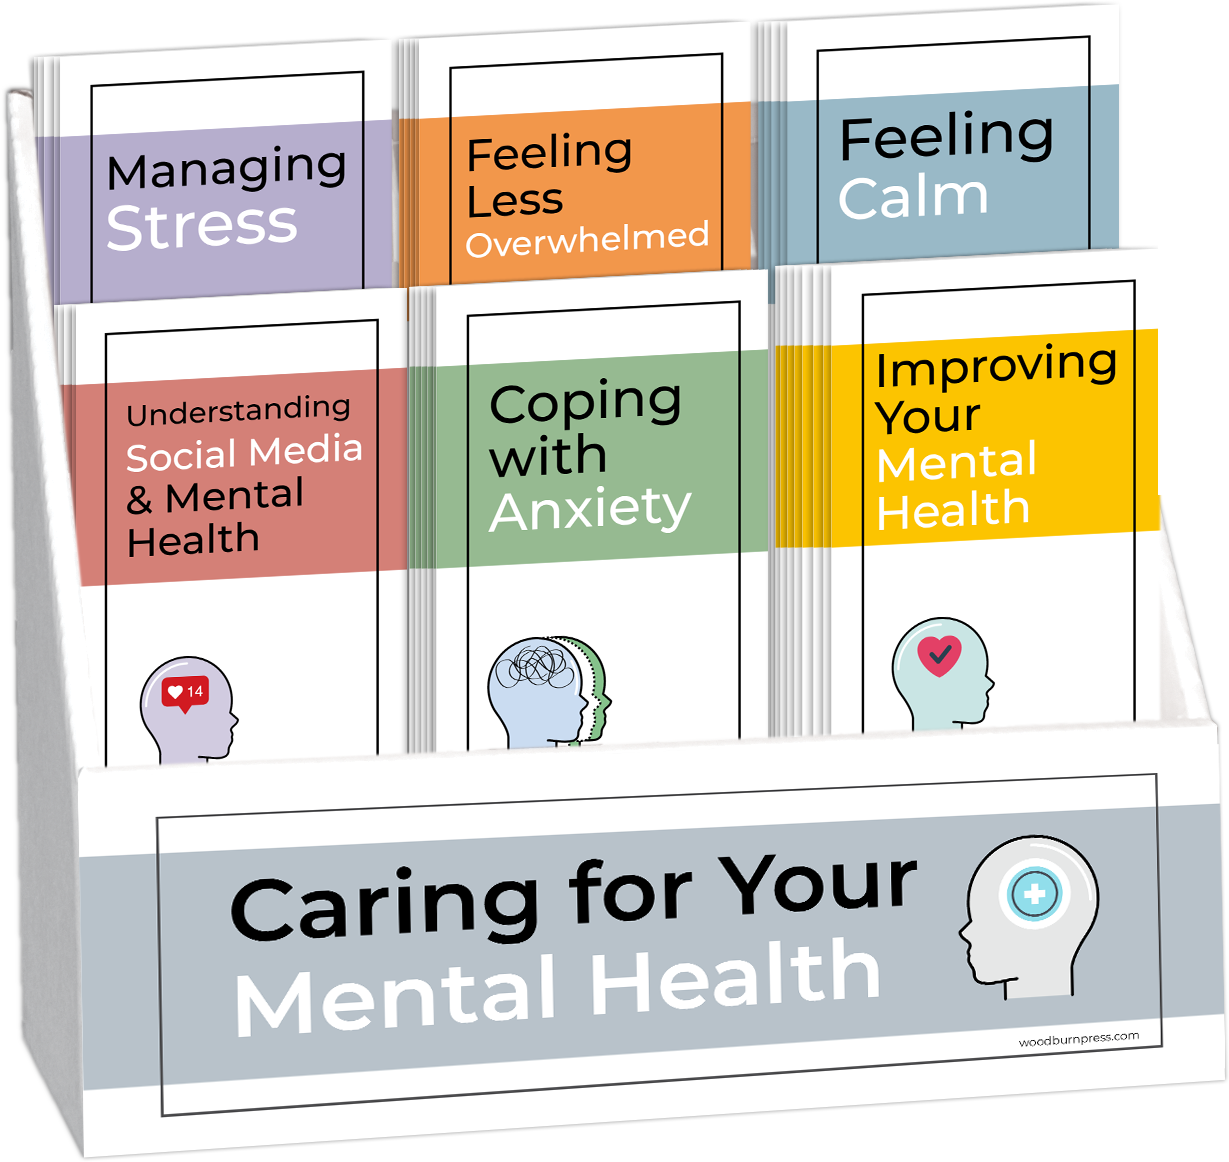 Caring for Your Mental Health Pamphlet Display Package